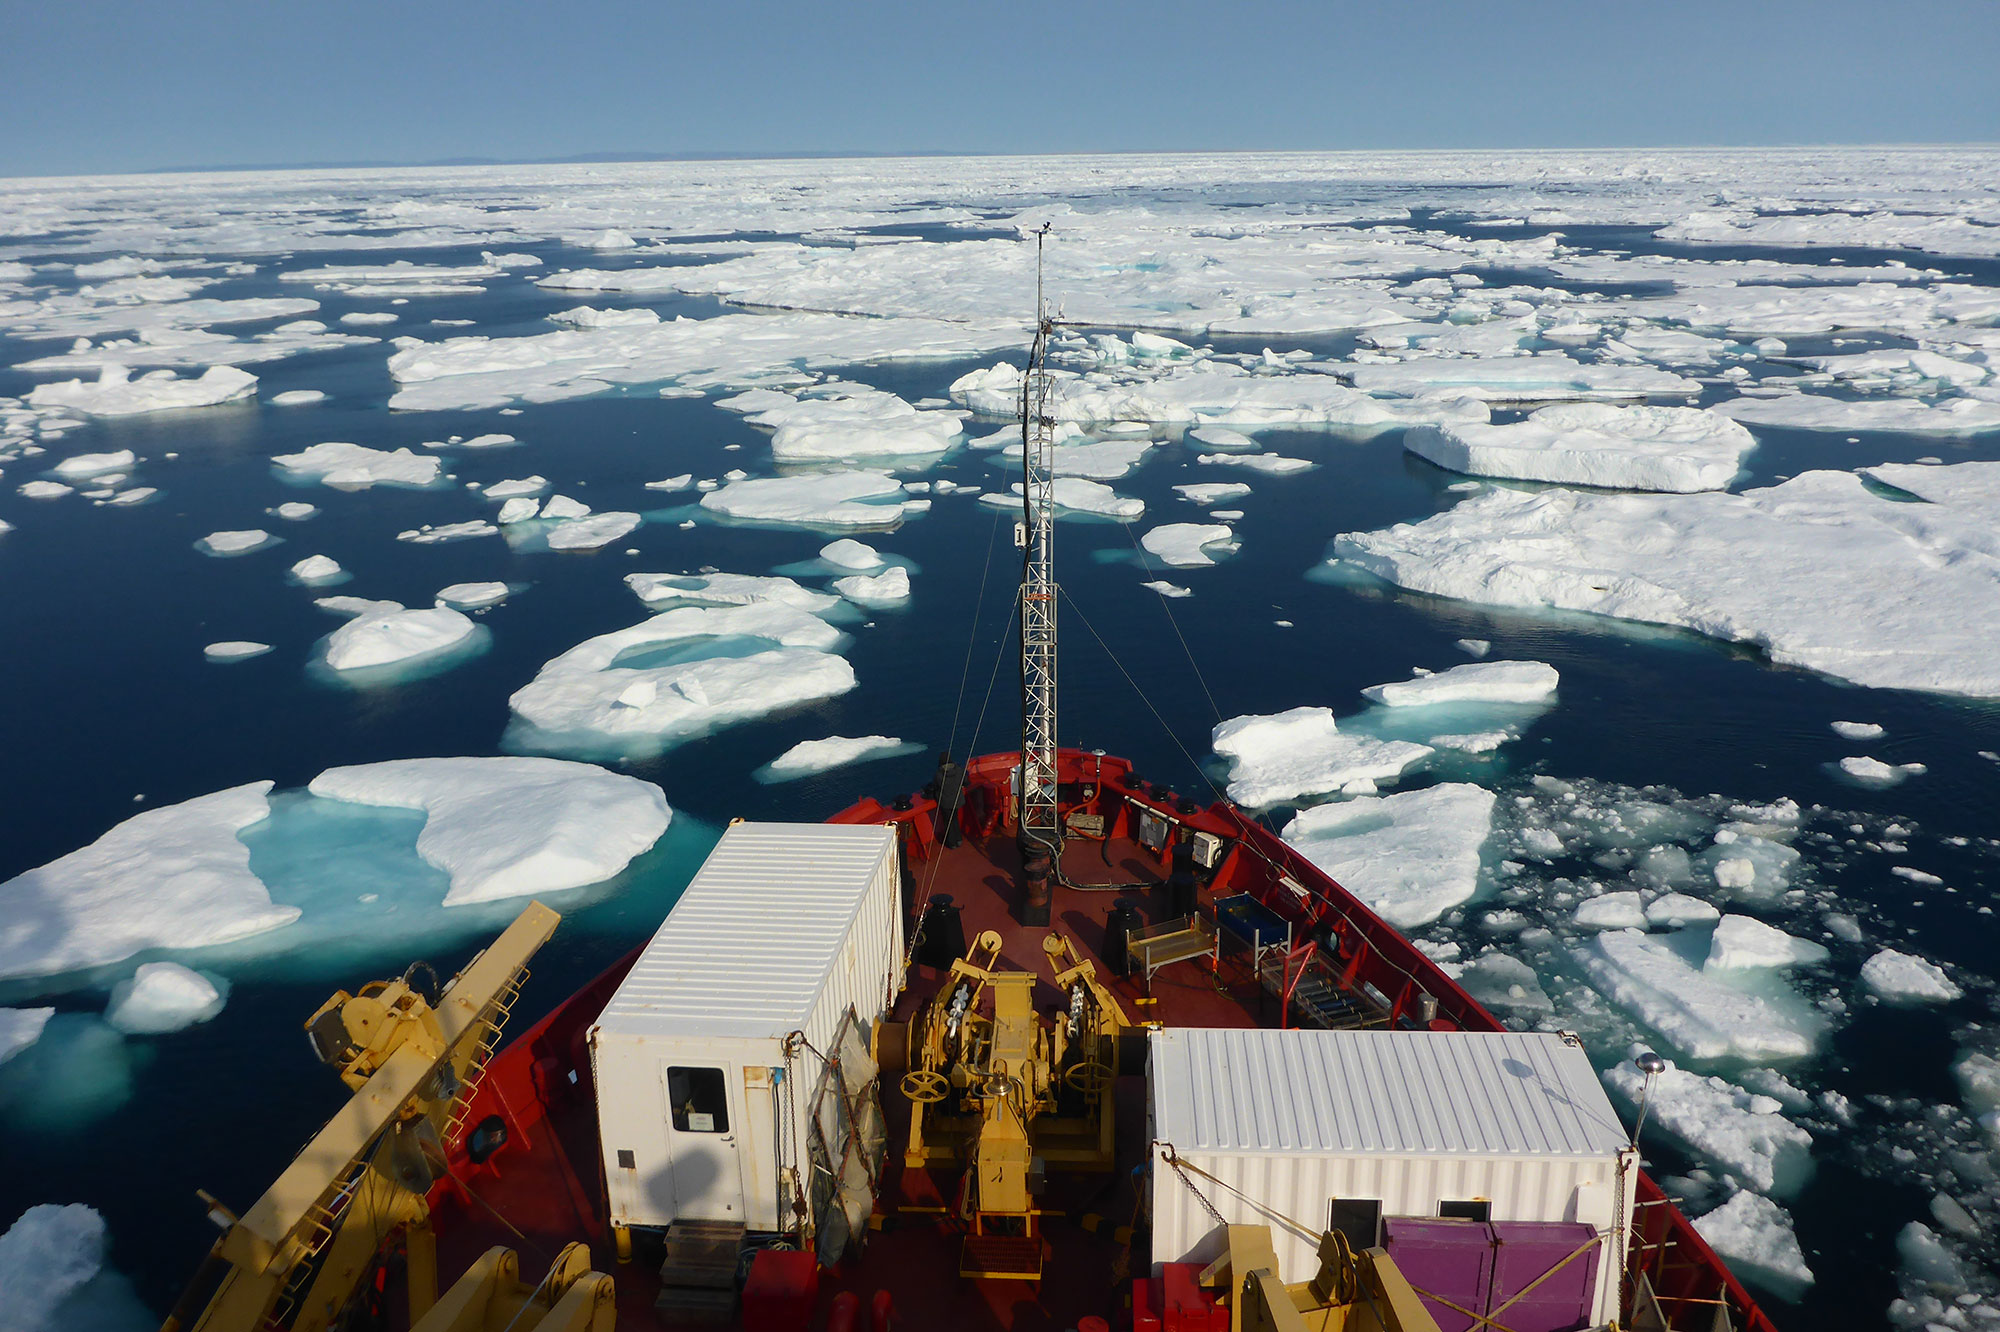 Picture taken on board the CCGS Amundsen where the researchers lived and worked for 5 weeks in the sea ice (Dr Charel Wohl).